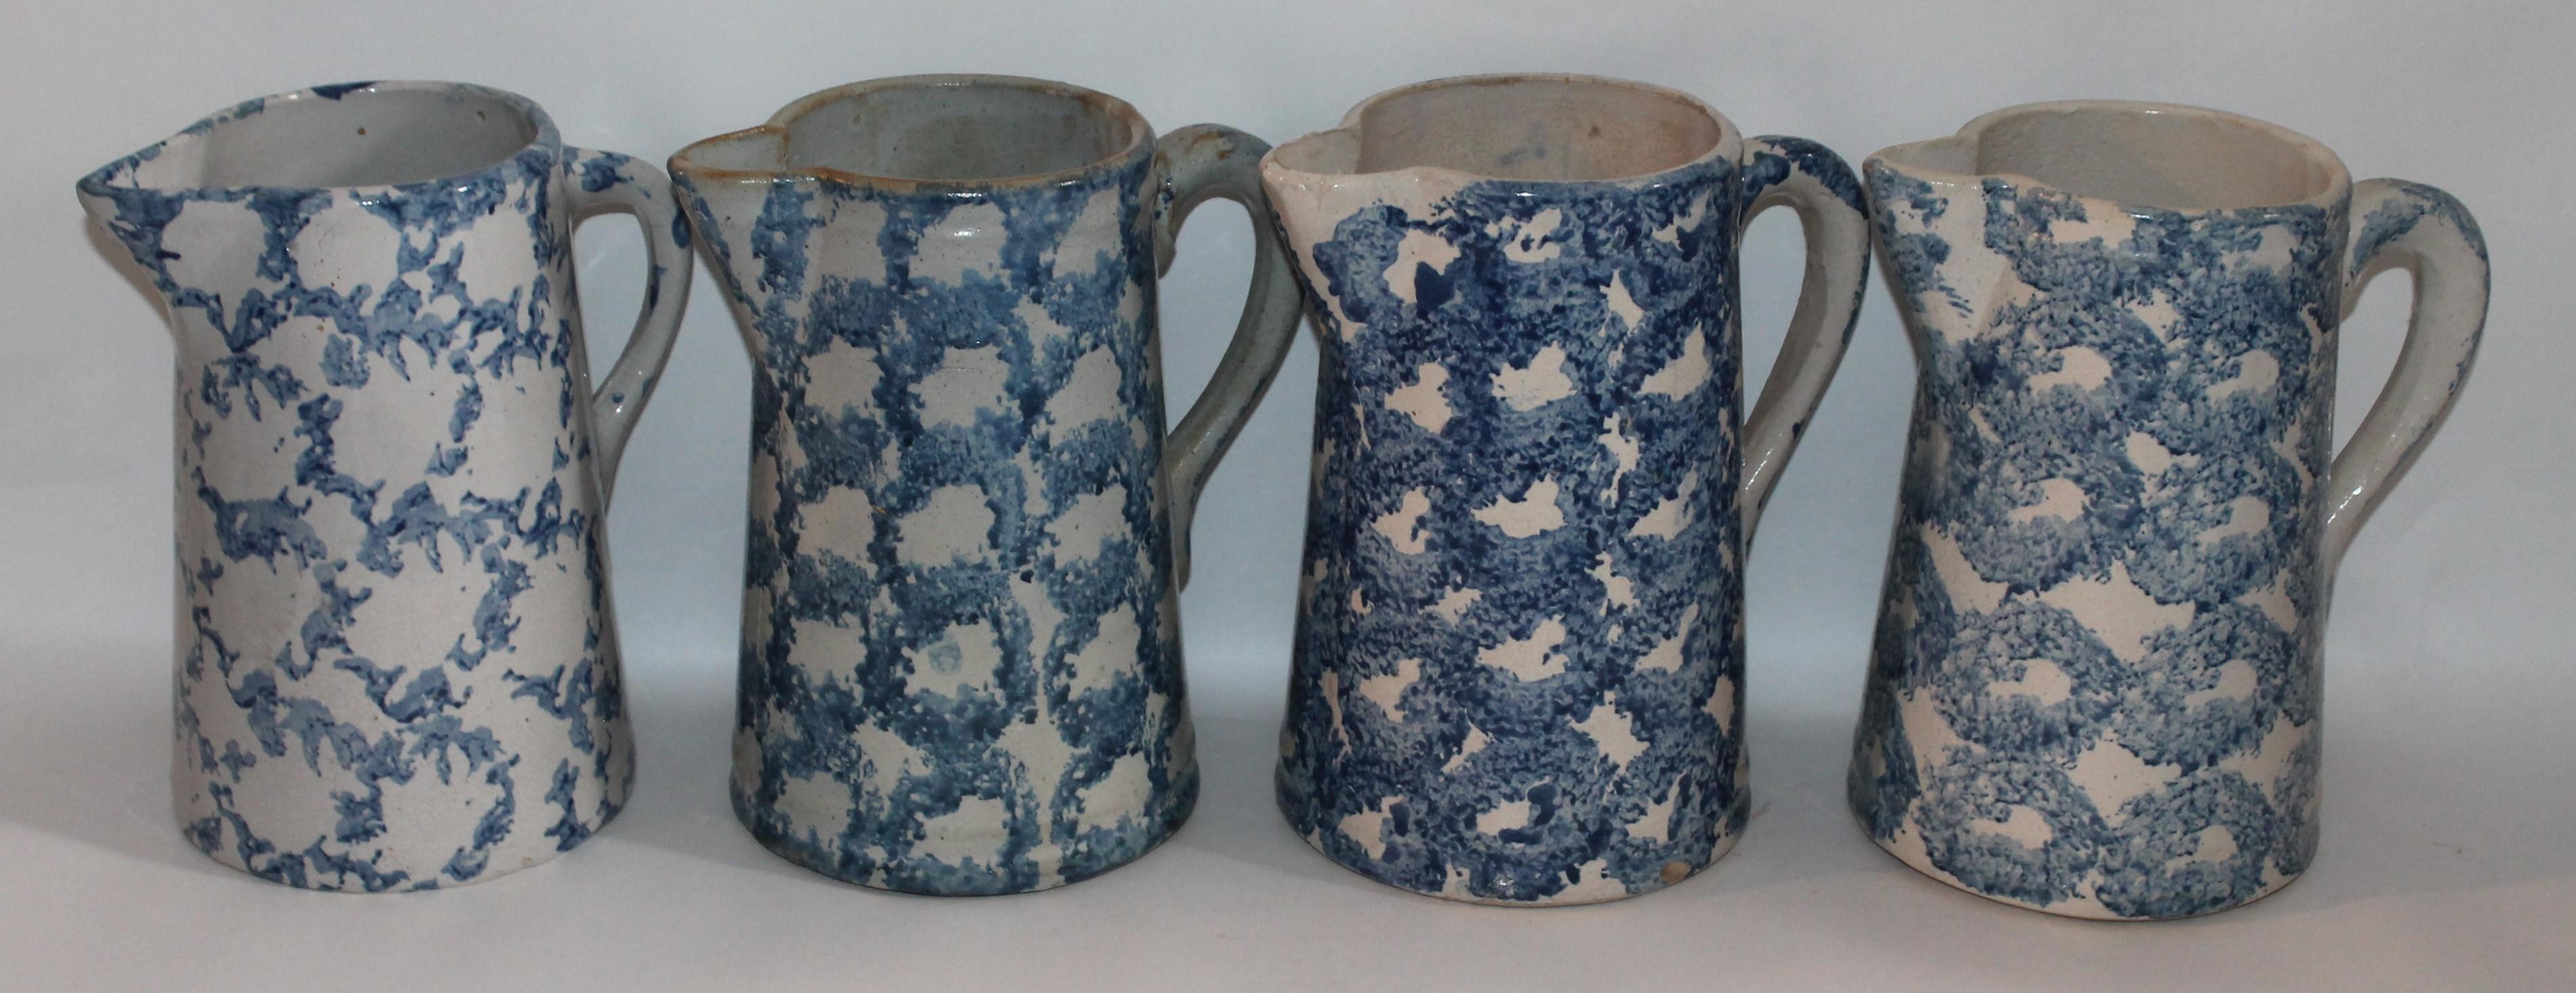 Design pattern sponge ware pitchers in great antique condition. The blue and white patter is in a smoke design patter. Great age.

All sponge pitchers measure the same. Individually 695.00 each.